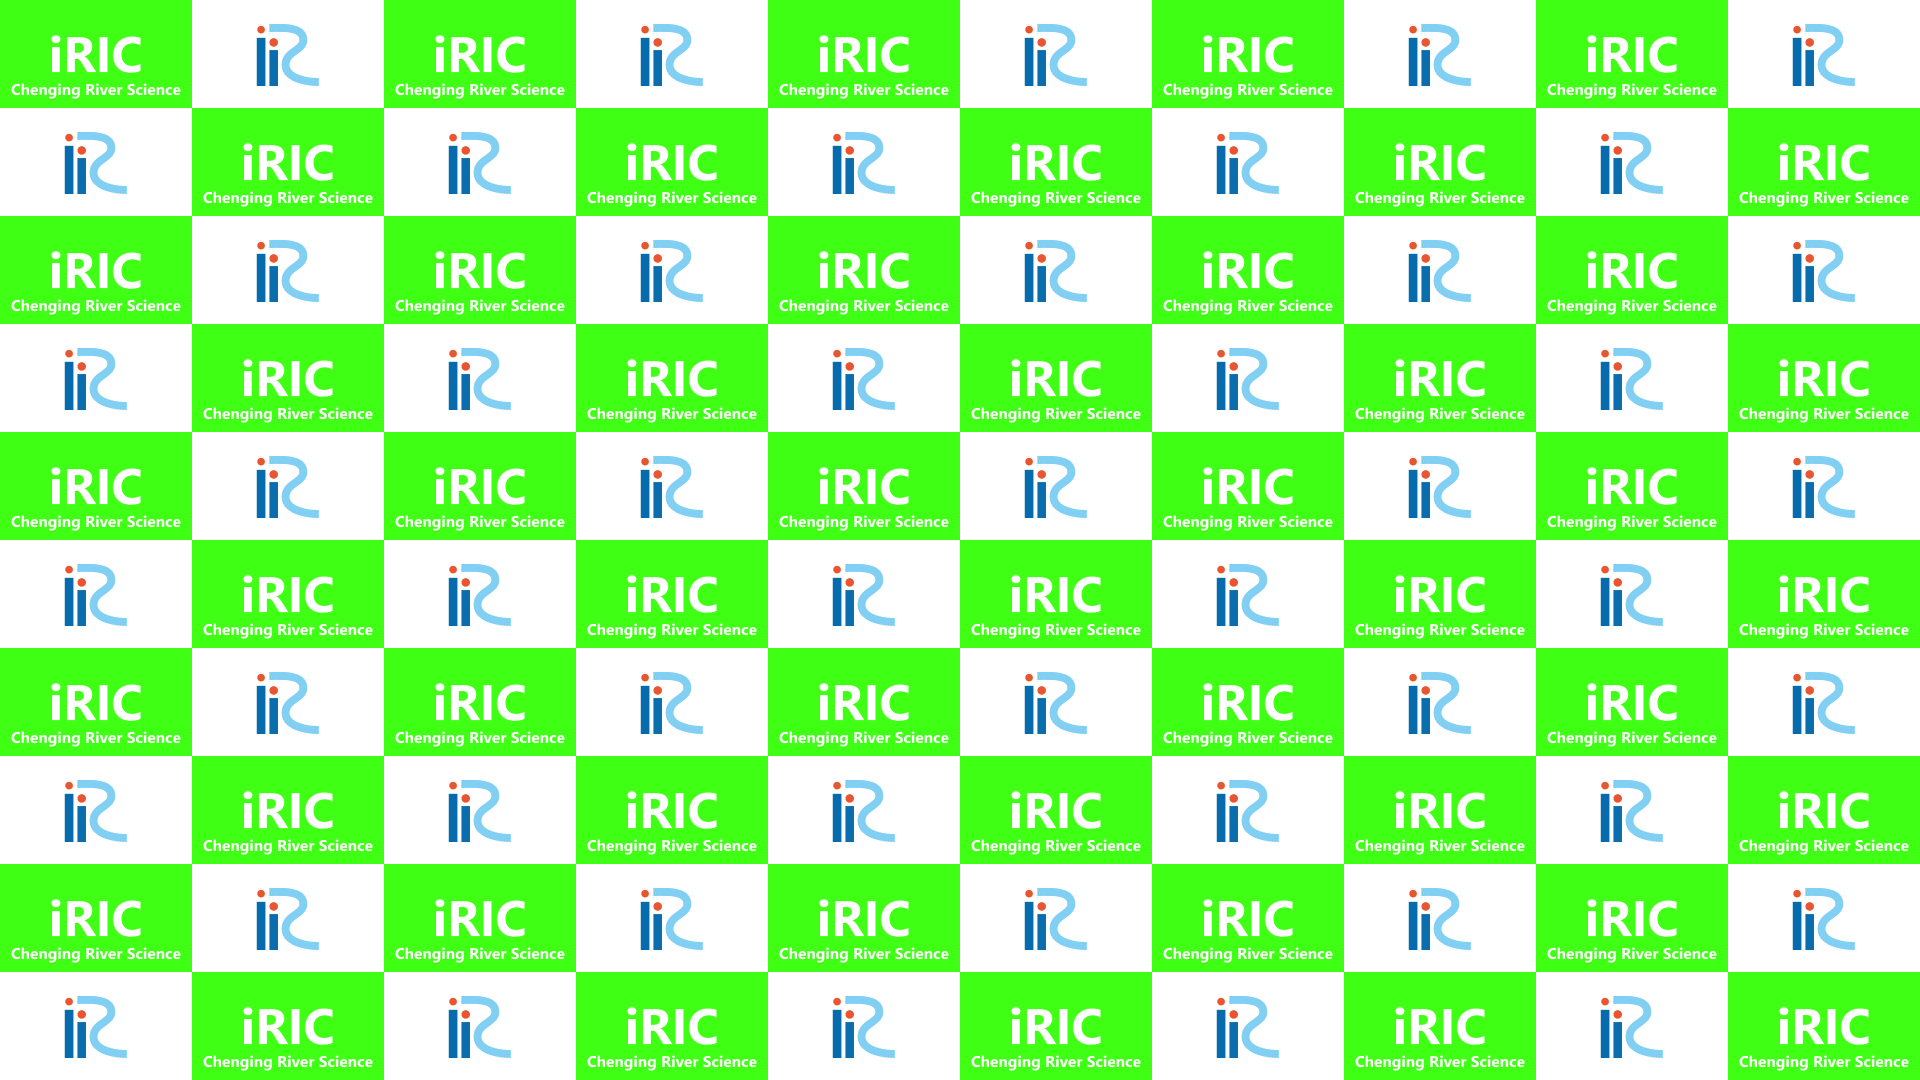 Roblox Robux, HD Png Download is free transparent png image. To